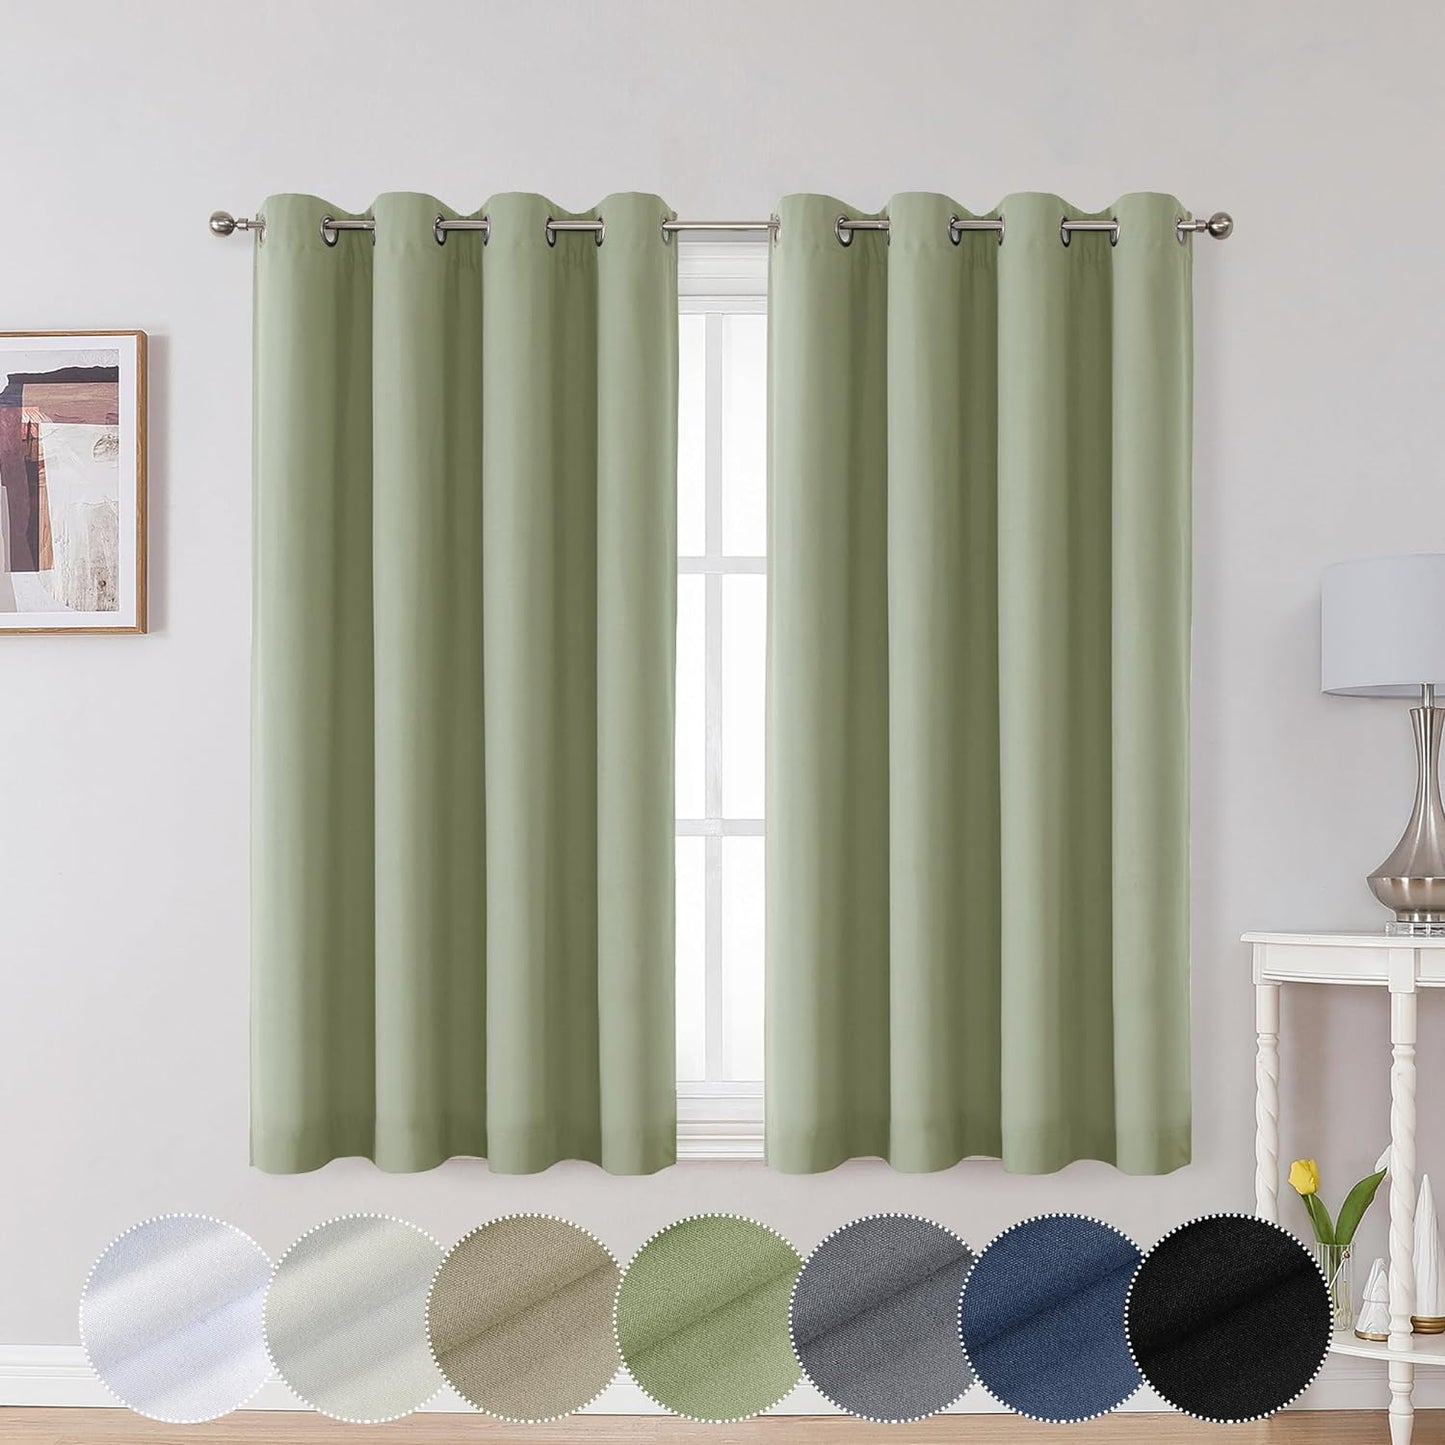 OWENIE Maya 100% Blackout Curtains 84 Inch Length 2 Panels Set, Greyish White Solid Heavy Thermal Insulated Grommets Curtains for Bedroom & Living Room, 2 Panels (Each 52 W X 84 L,Greyish White)  OWENIE Sage Green 52W X 45L 